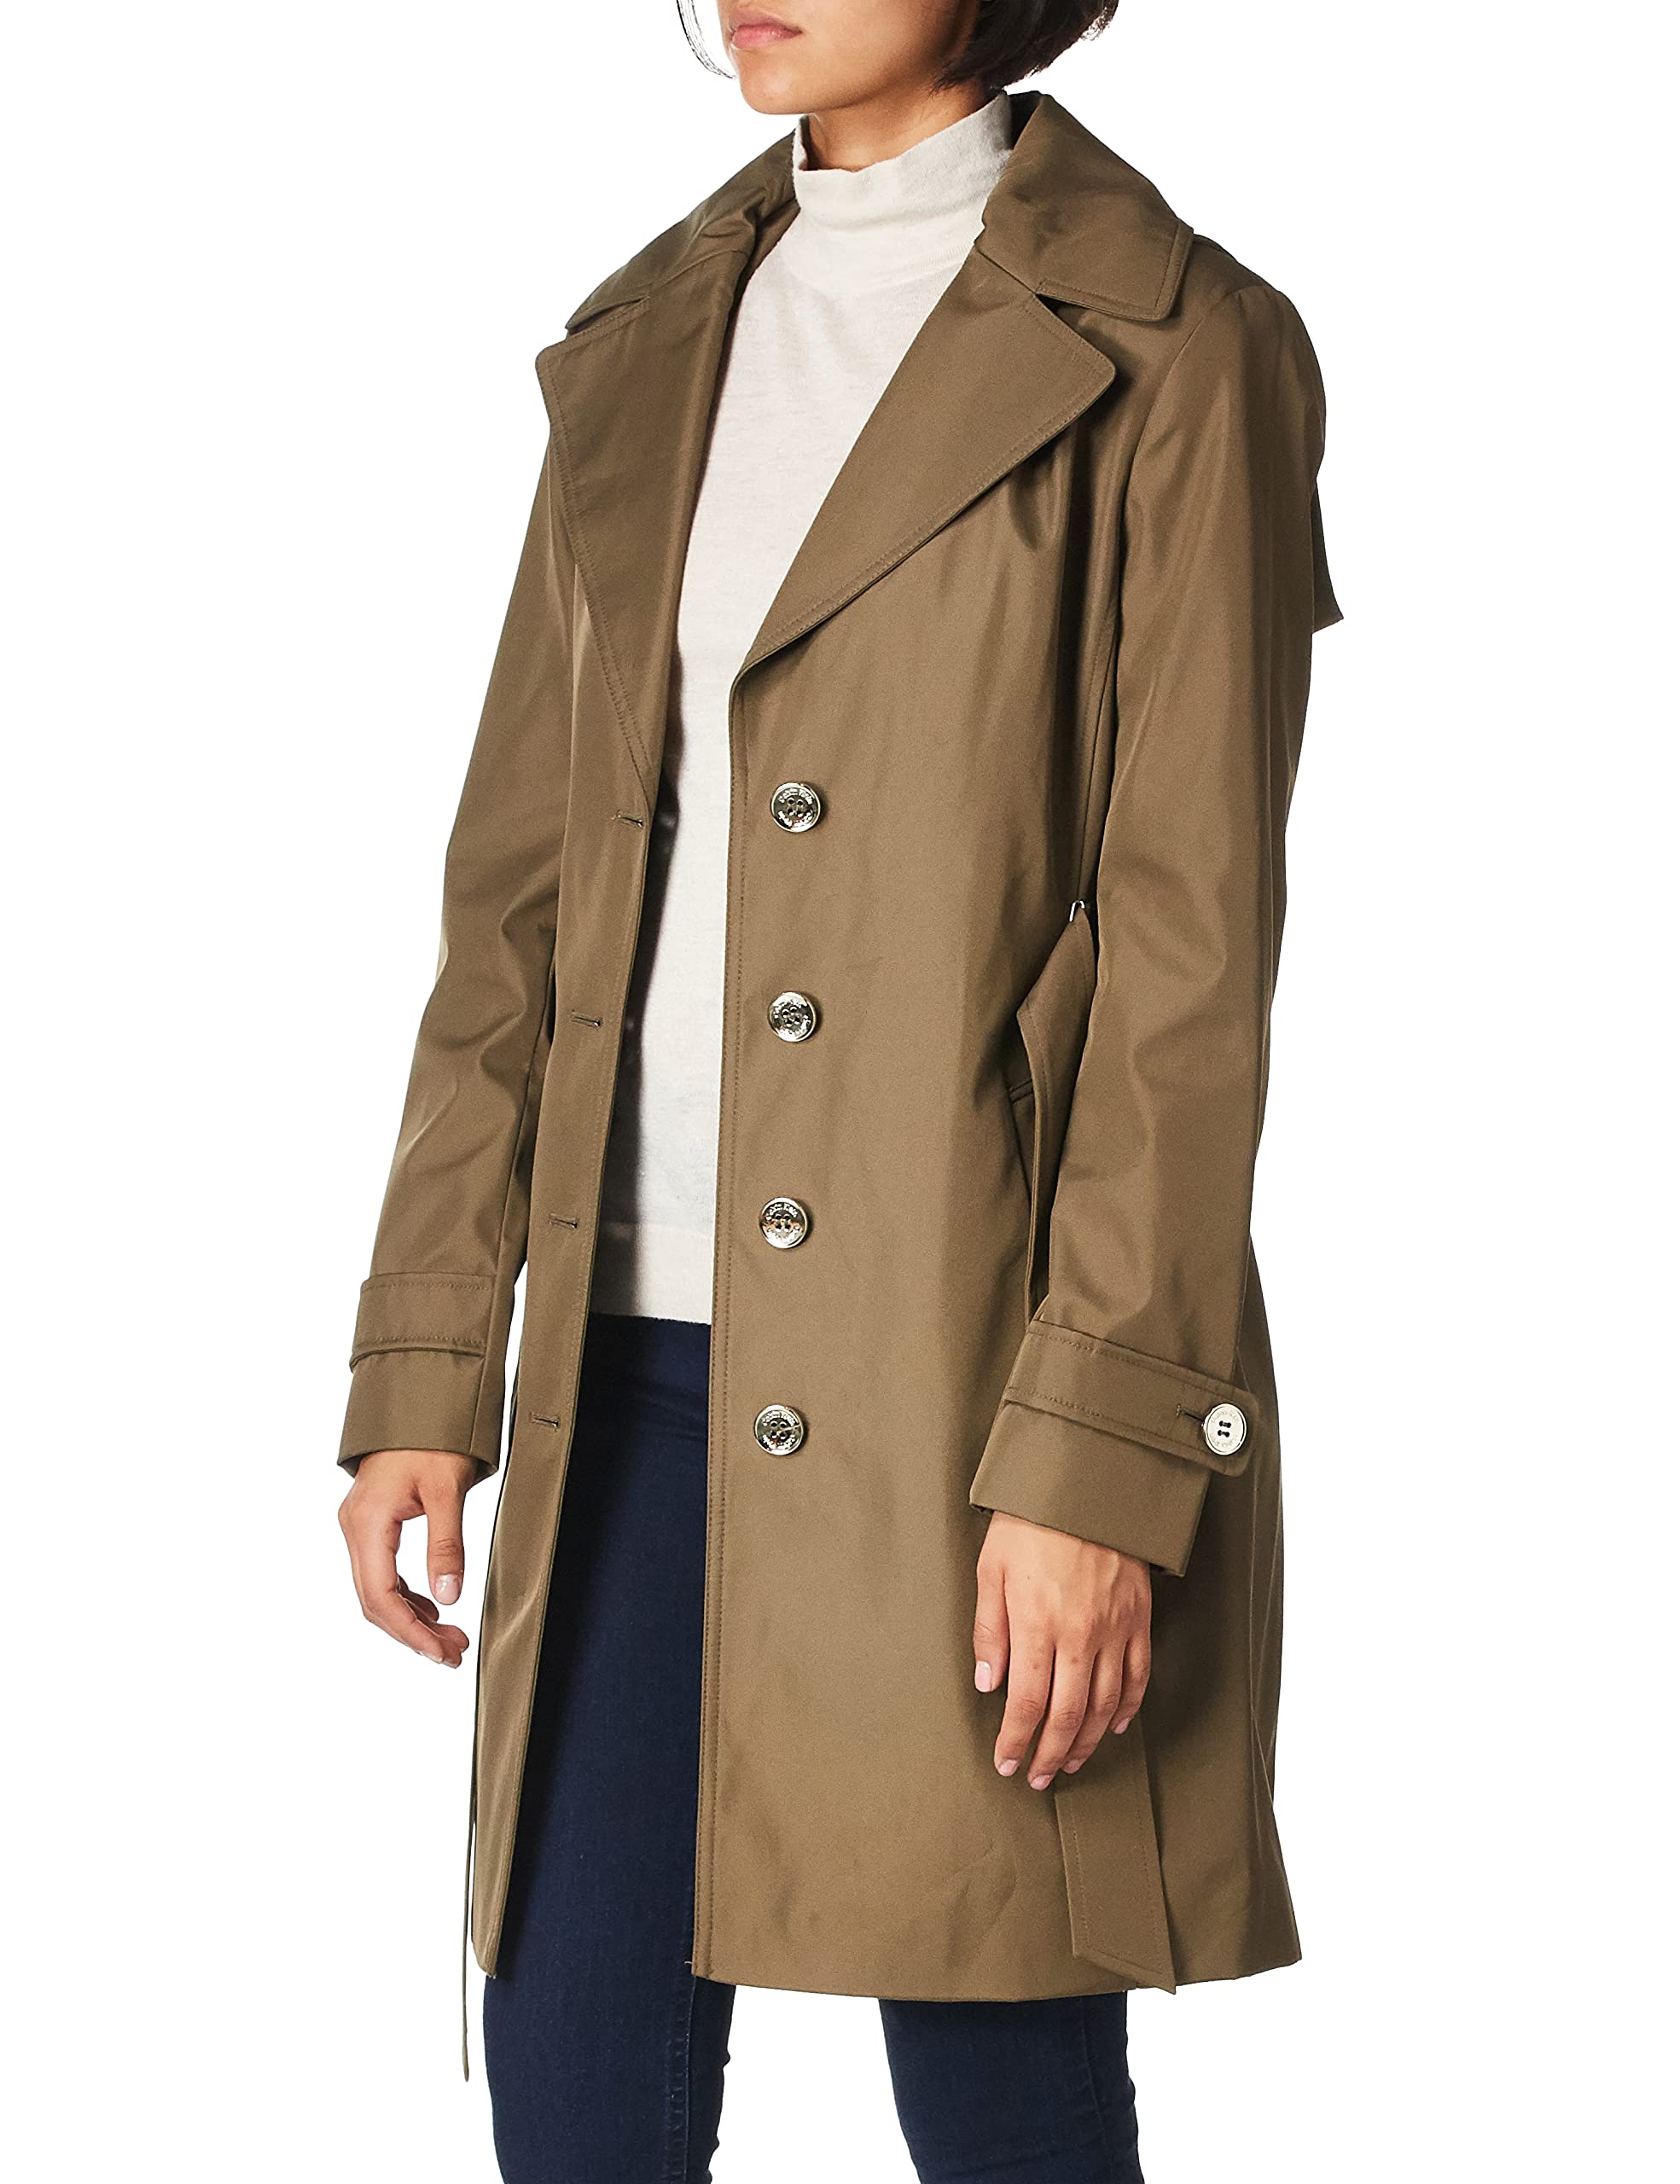 Calvin Klein Women's Single Breasted Belted Rain Jacket with Removable Hood